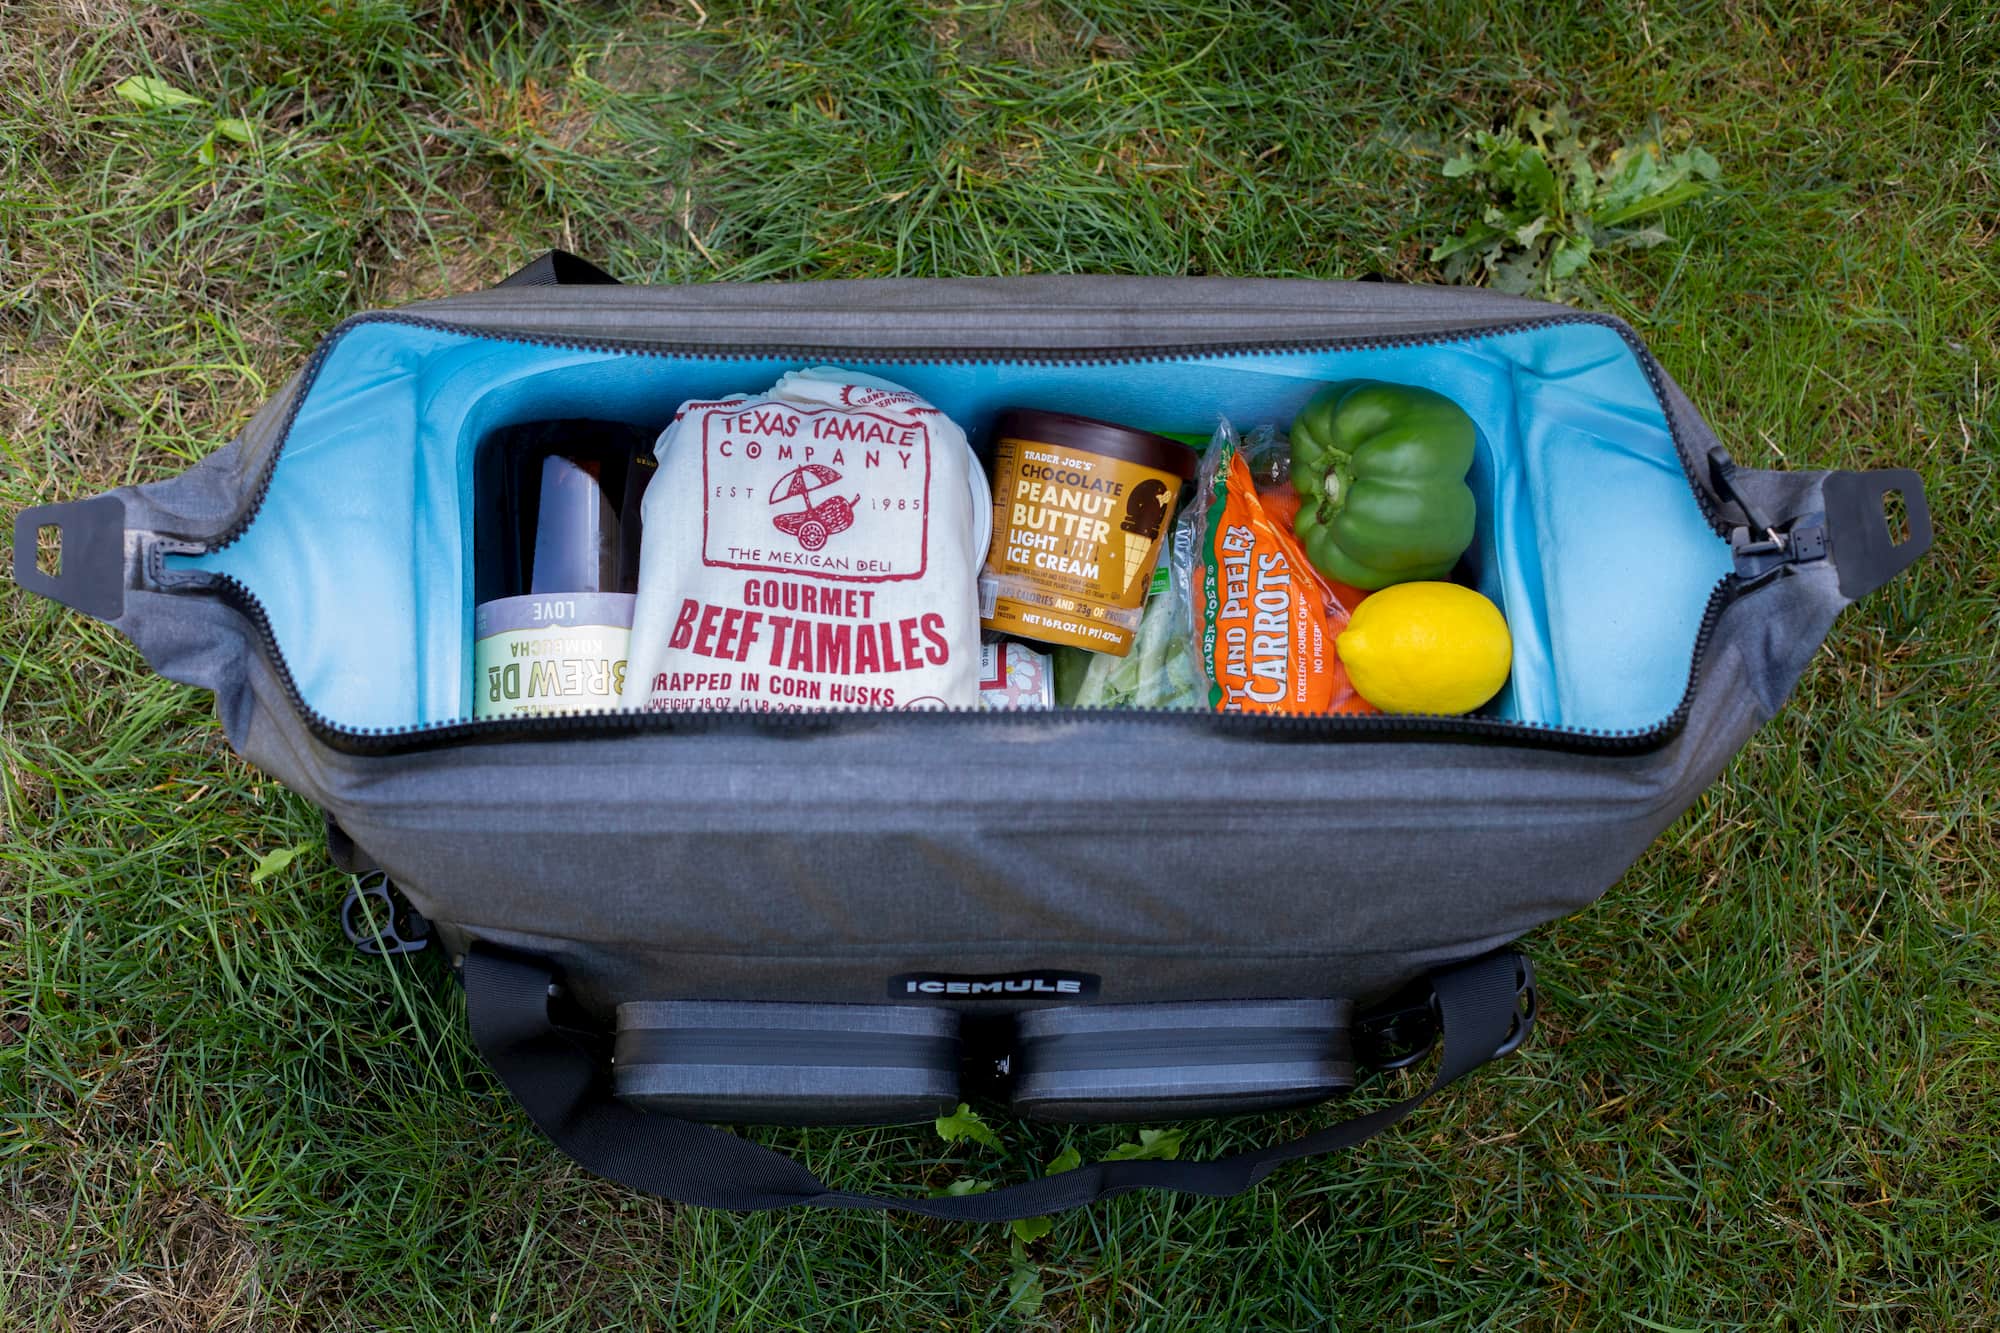 A fully packed Icemule cooler.